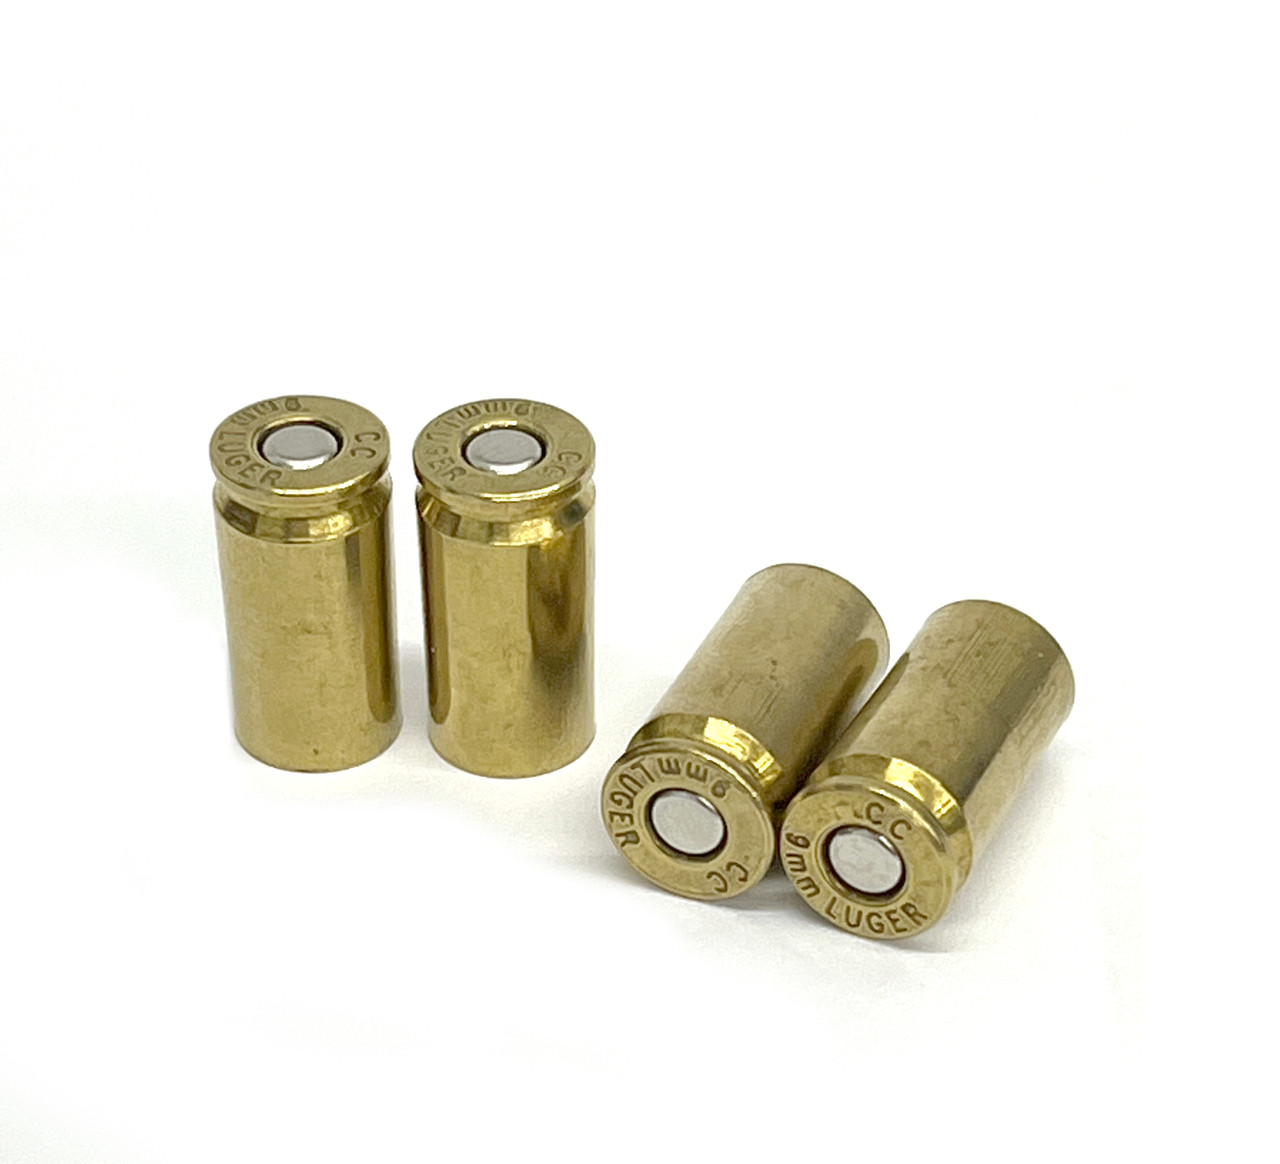 Capital Cartridge - 9mm - Processed AND Primed Brass - 500pcs - FREE Ammo  Can - Capital Cartridge